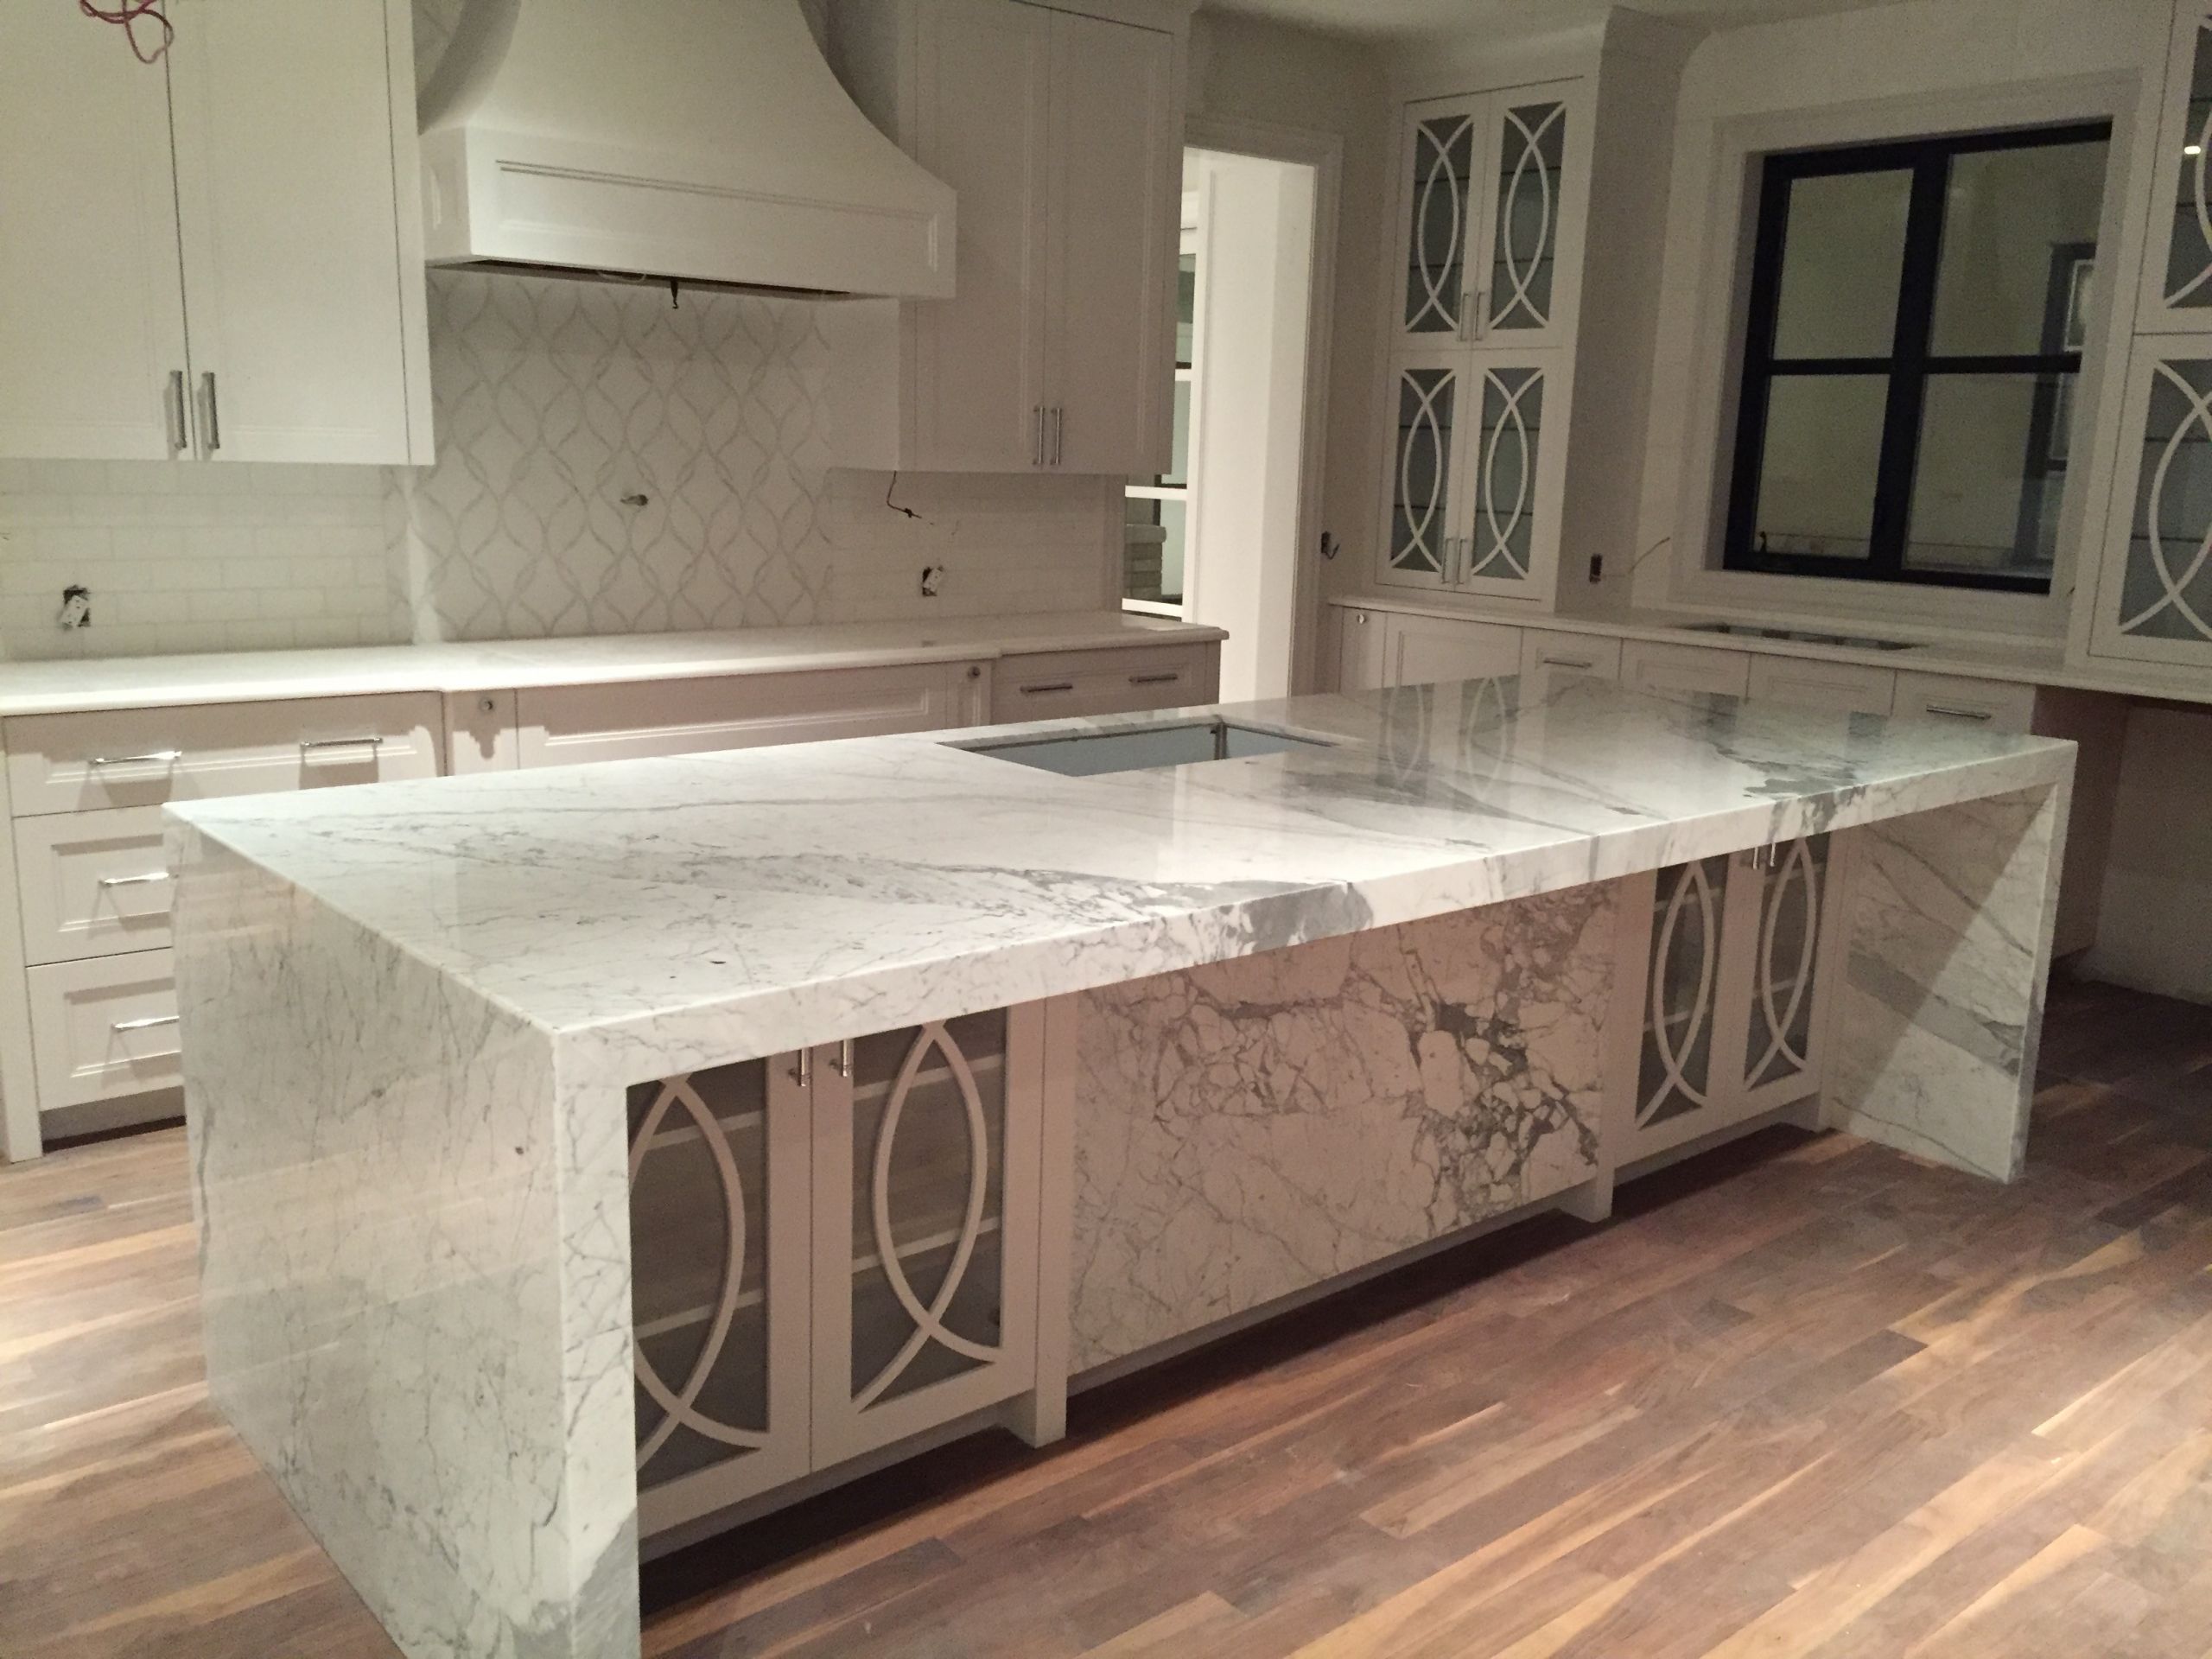 Kitchen Island With Granite Countertop
 Residential Gallery Laporte Surfaces